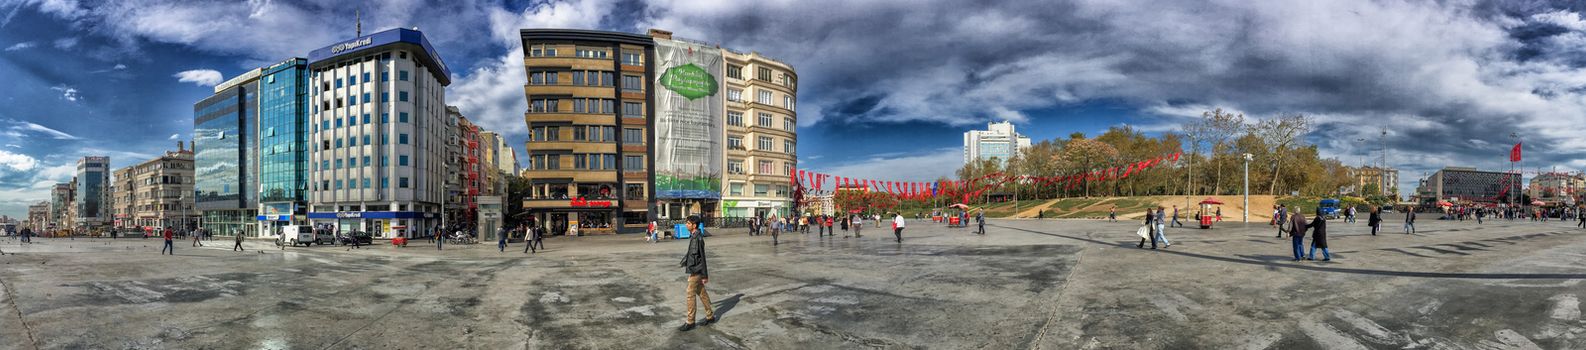 ISTANBUL, TURKEY - OCTOBER 23, 2014: People walking at Taksim Square in Istanbul. Taksim Square is a leisure district famous for its restaurants, shops, and hotels.